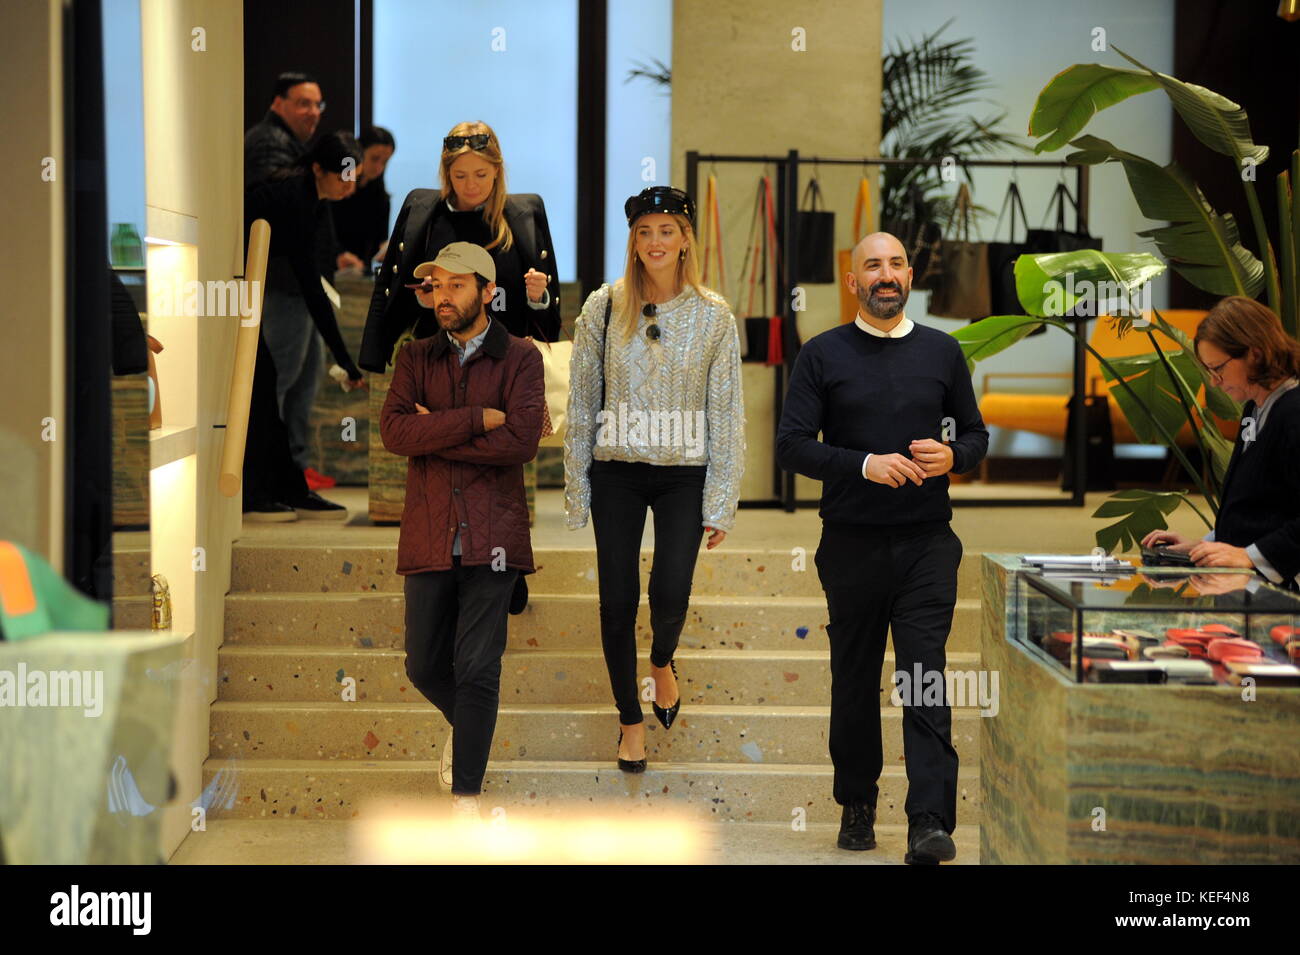 Milan, Chiara Ferragni shopping in the center with friends The famous Stock  Photo - Alamy